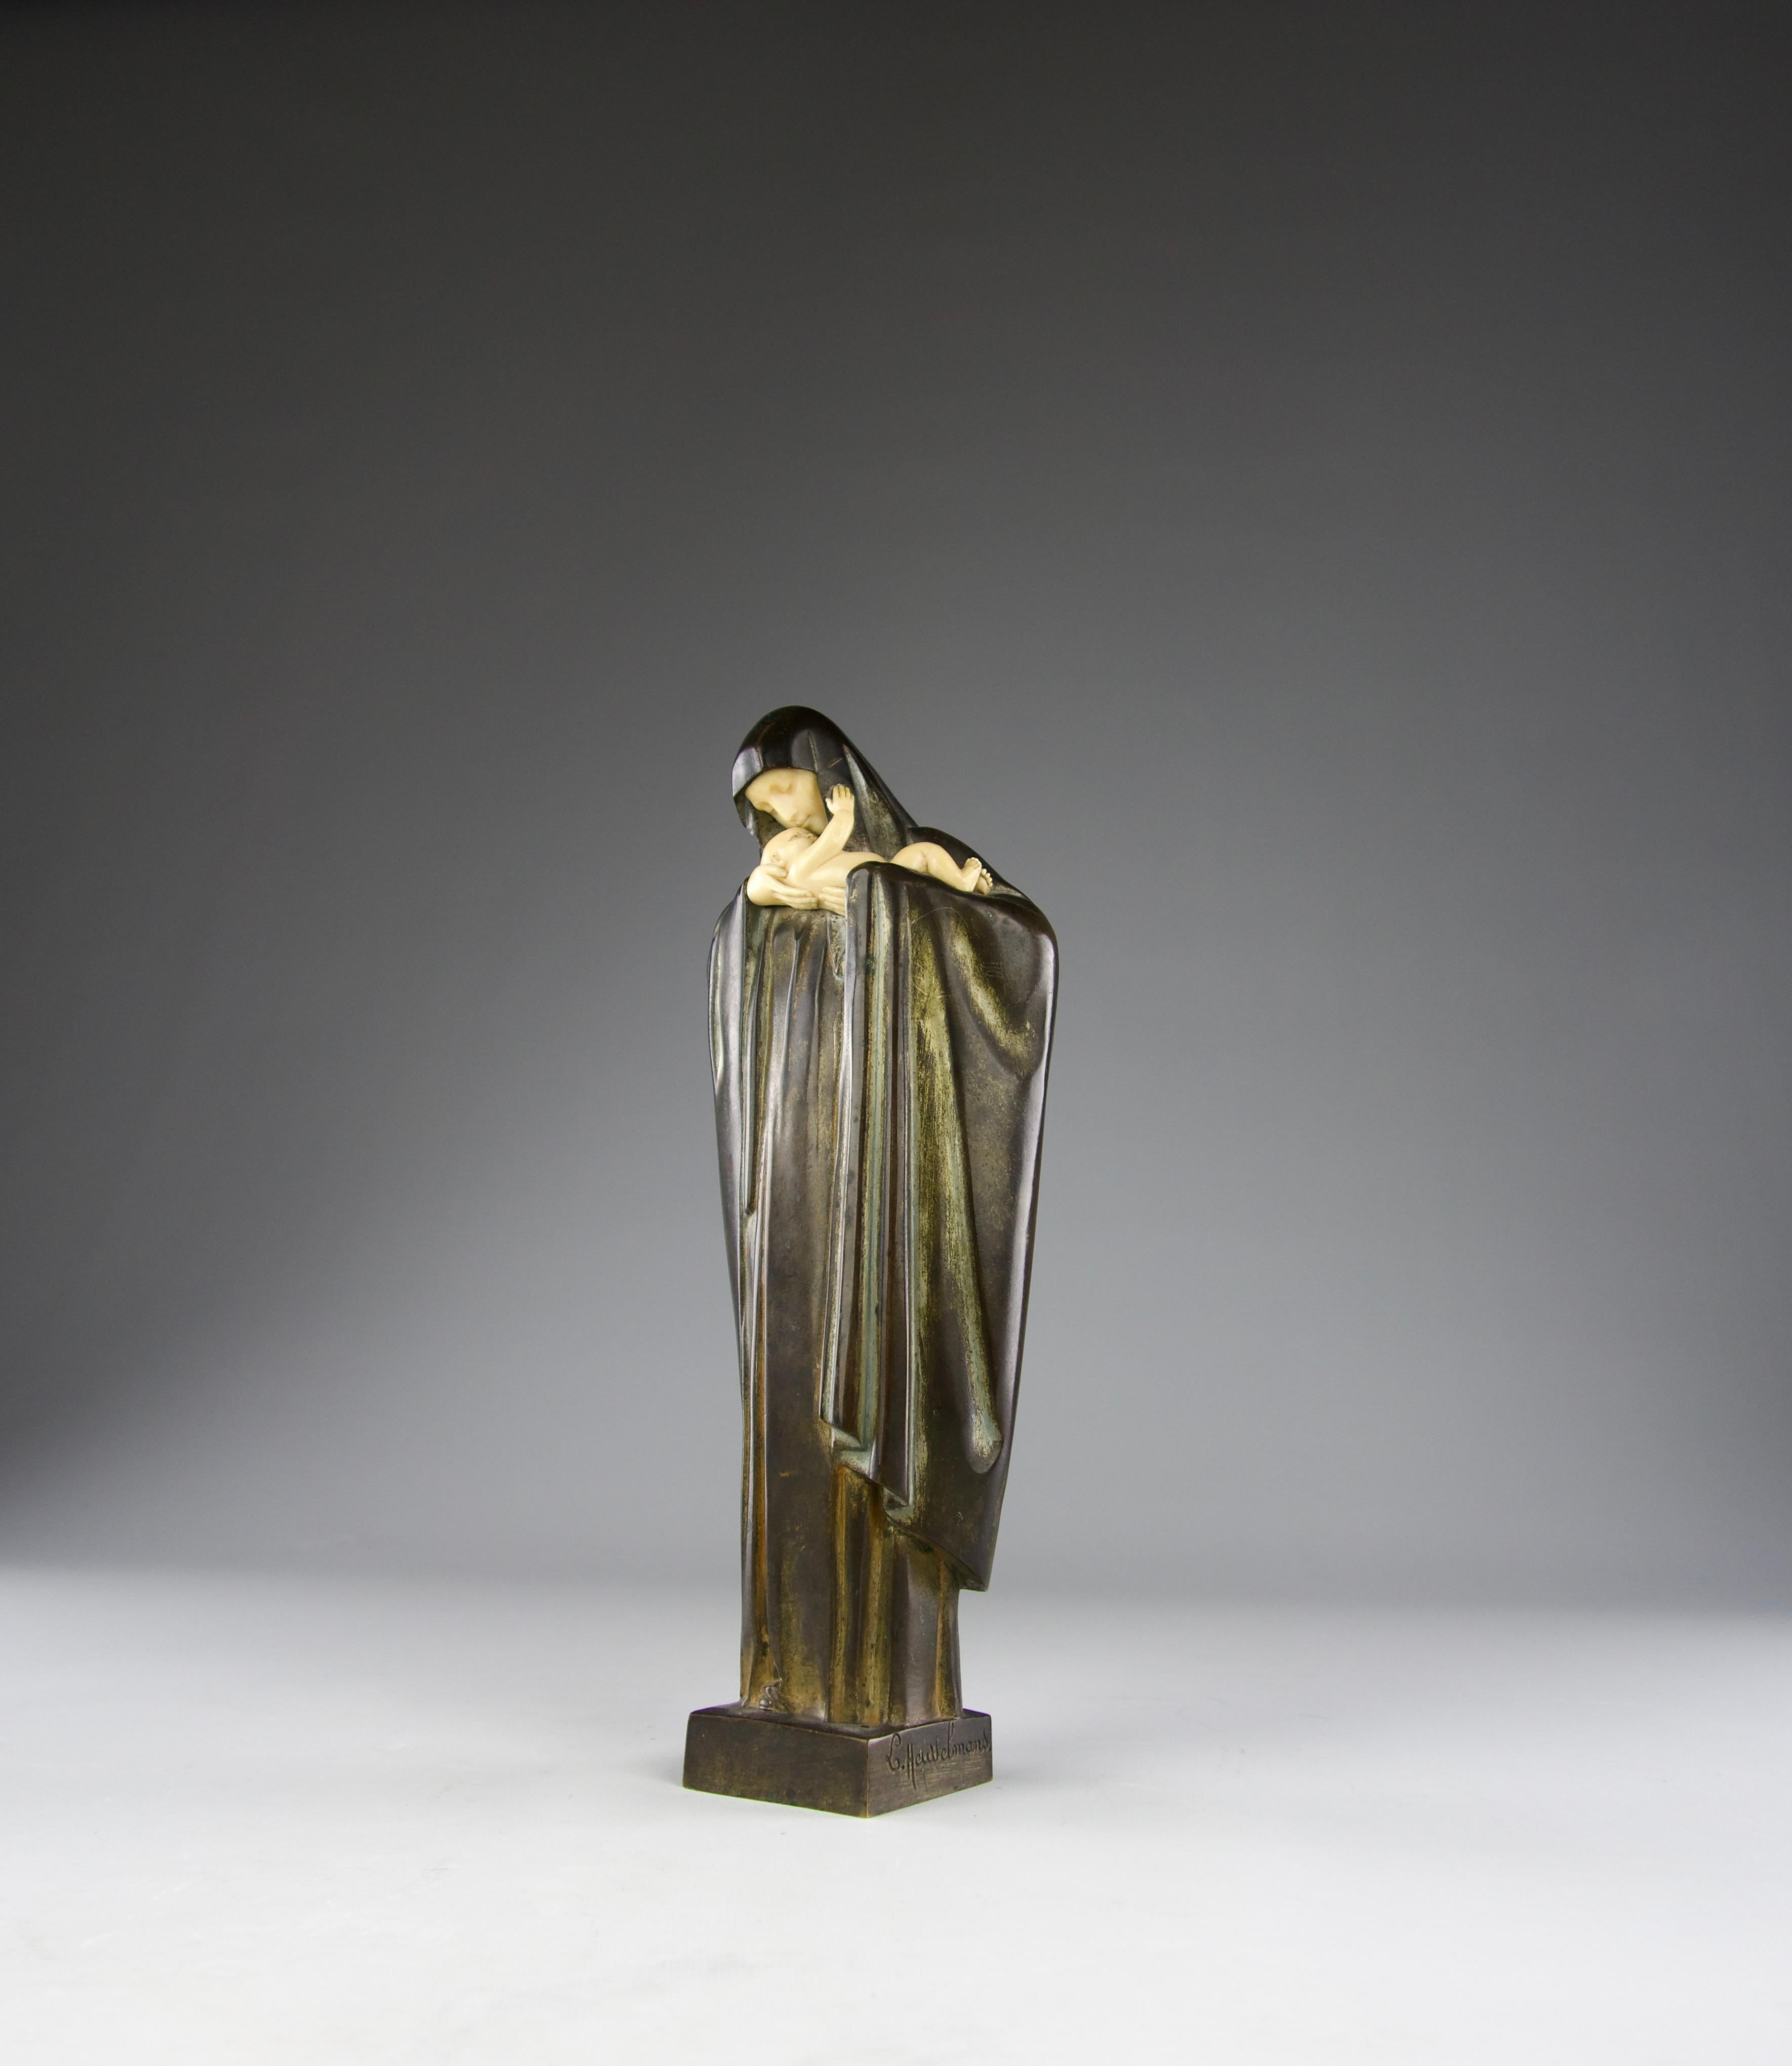 Superb patinated bronze and ivory art deco sculpture of the Virgin Mary tenderly holding her child, Jesus, by Lucienne Heuvelmans, signed. France 1920s.

Very good condition. 

Dimensions in cm ( H x L x l ) : 28.8 x 11 x 5.8

Secure shipping.